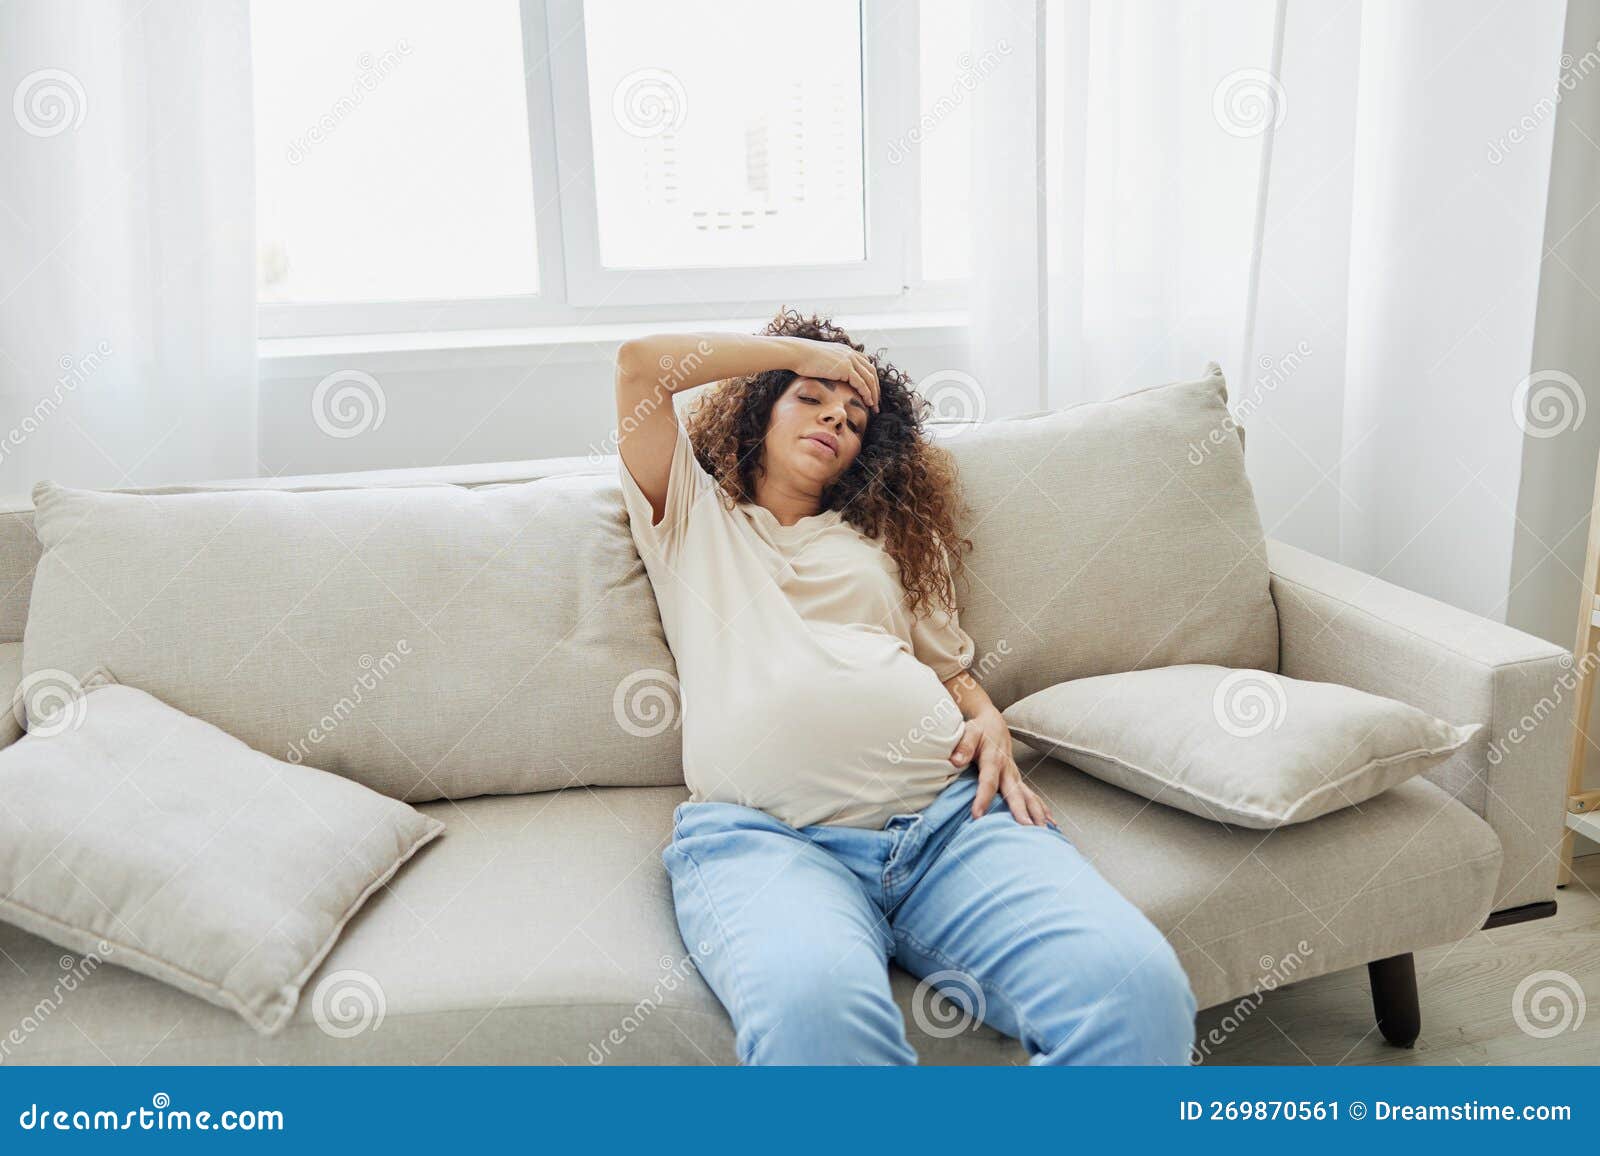 Pregnant Woman Sitting on the Couch at Home Headache, Pregnancy and ...